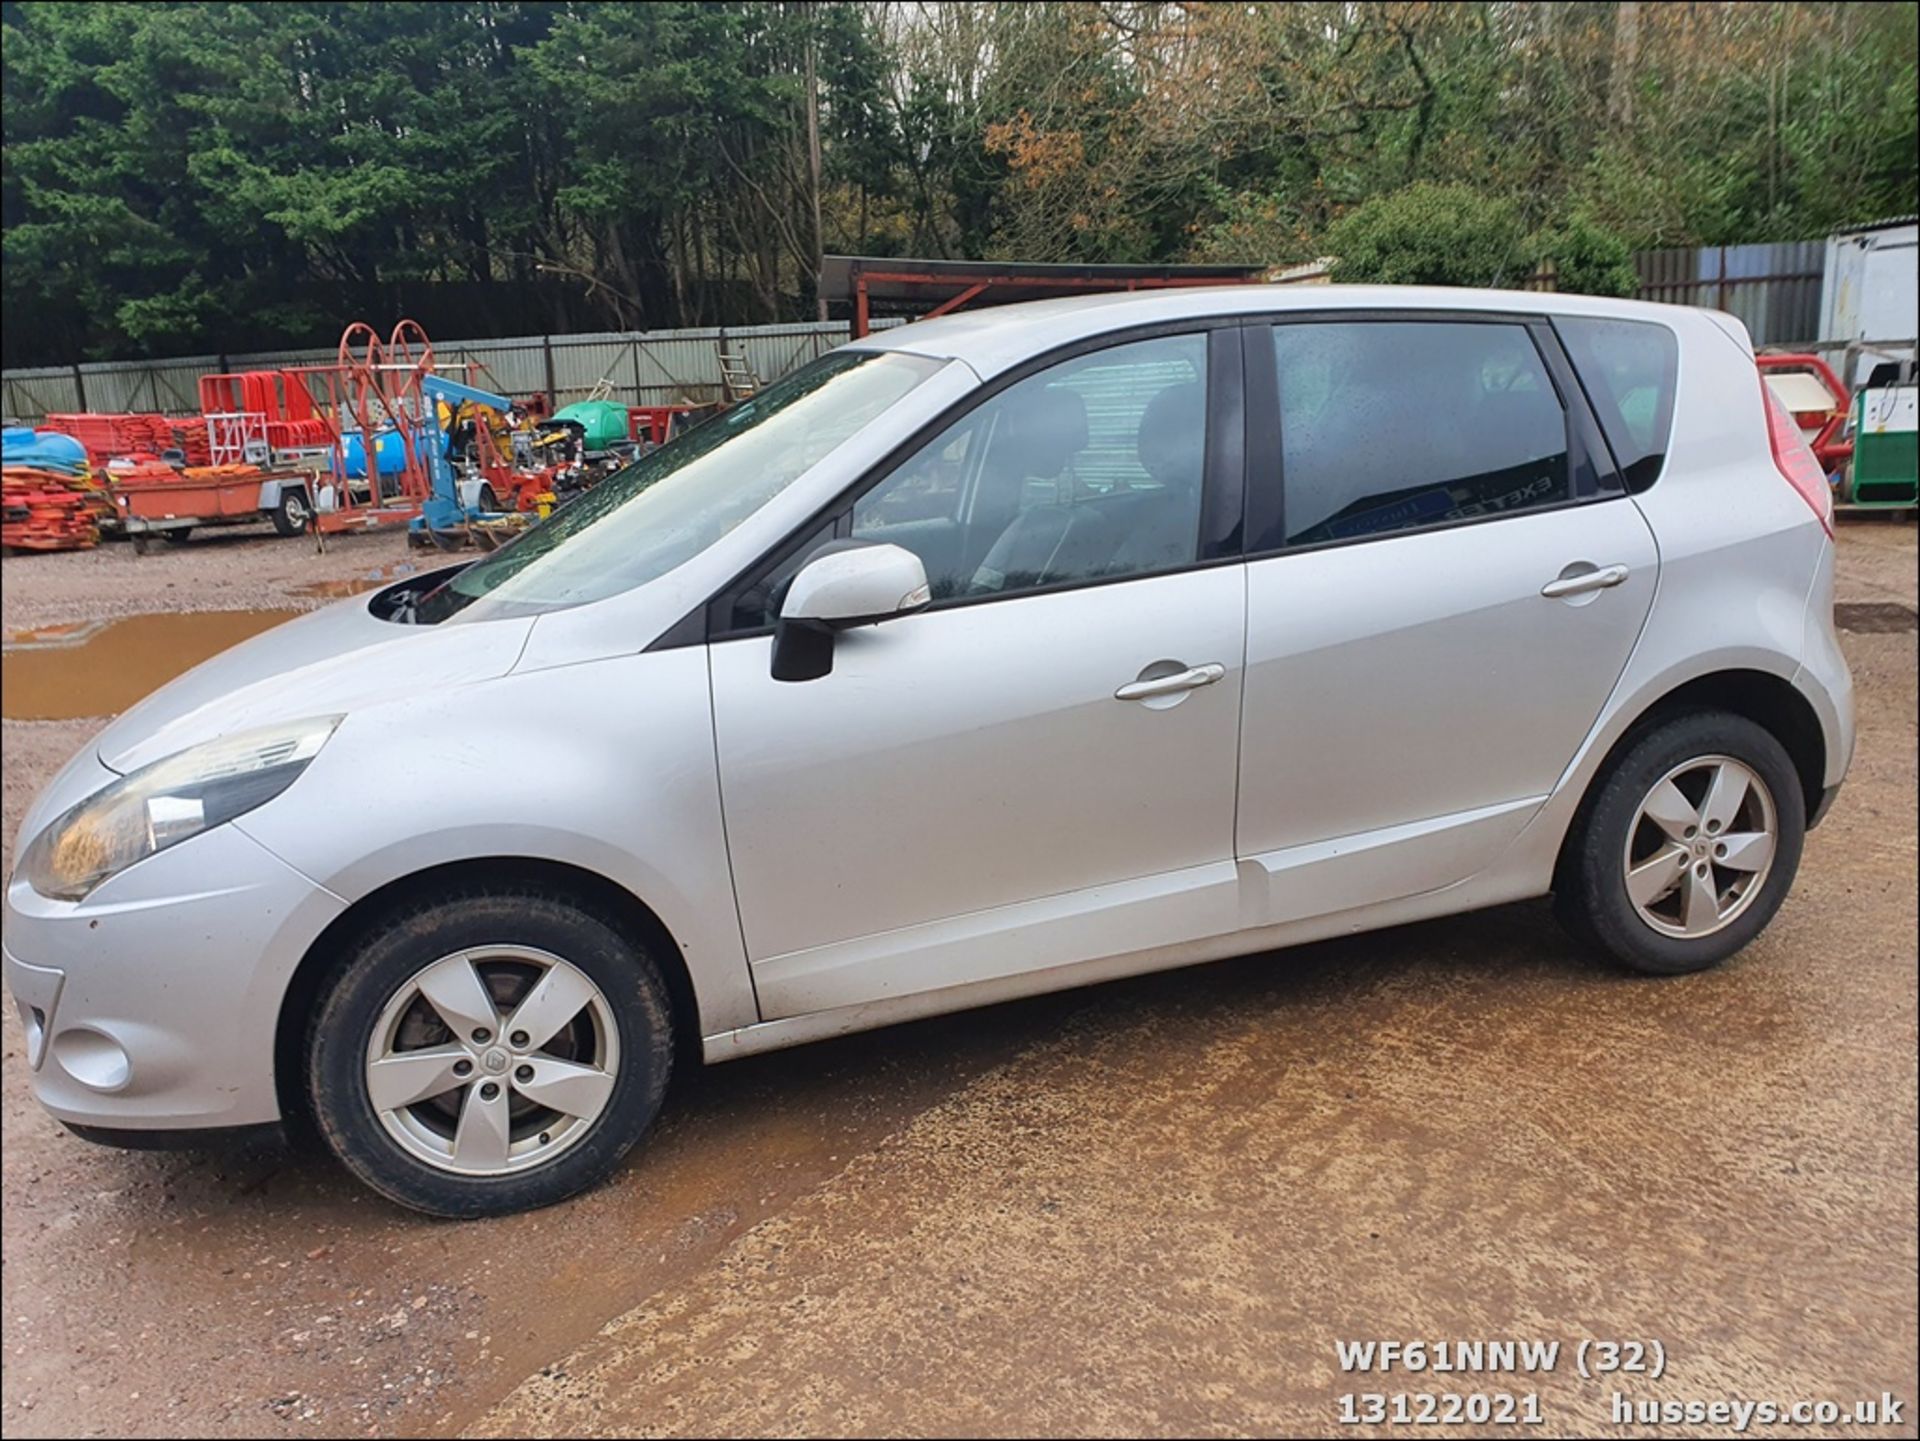 11/61 RENAULT SCENIC DYNAMIQUE TOMTOM D - 1461cc 5dr MPV (Silver, 93k) - Image 34 of 37